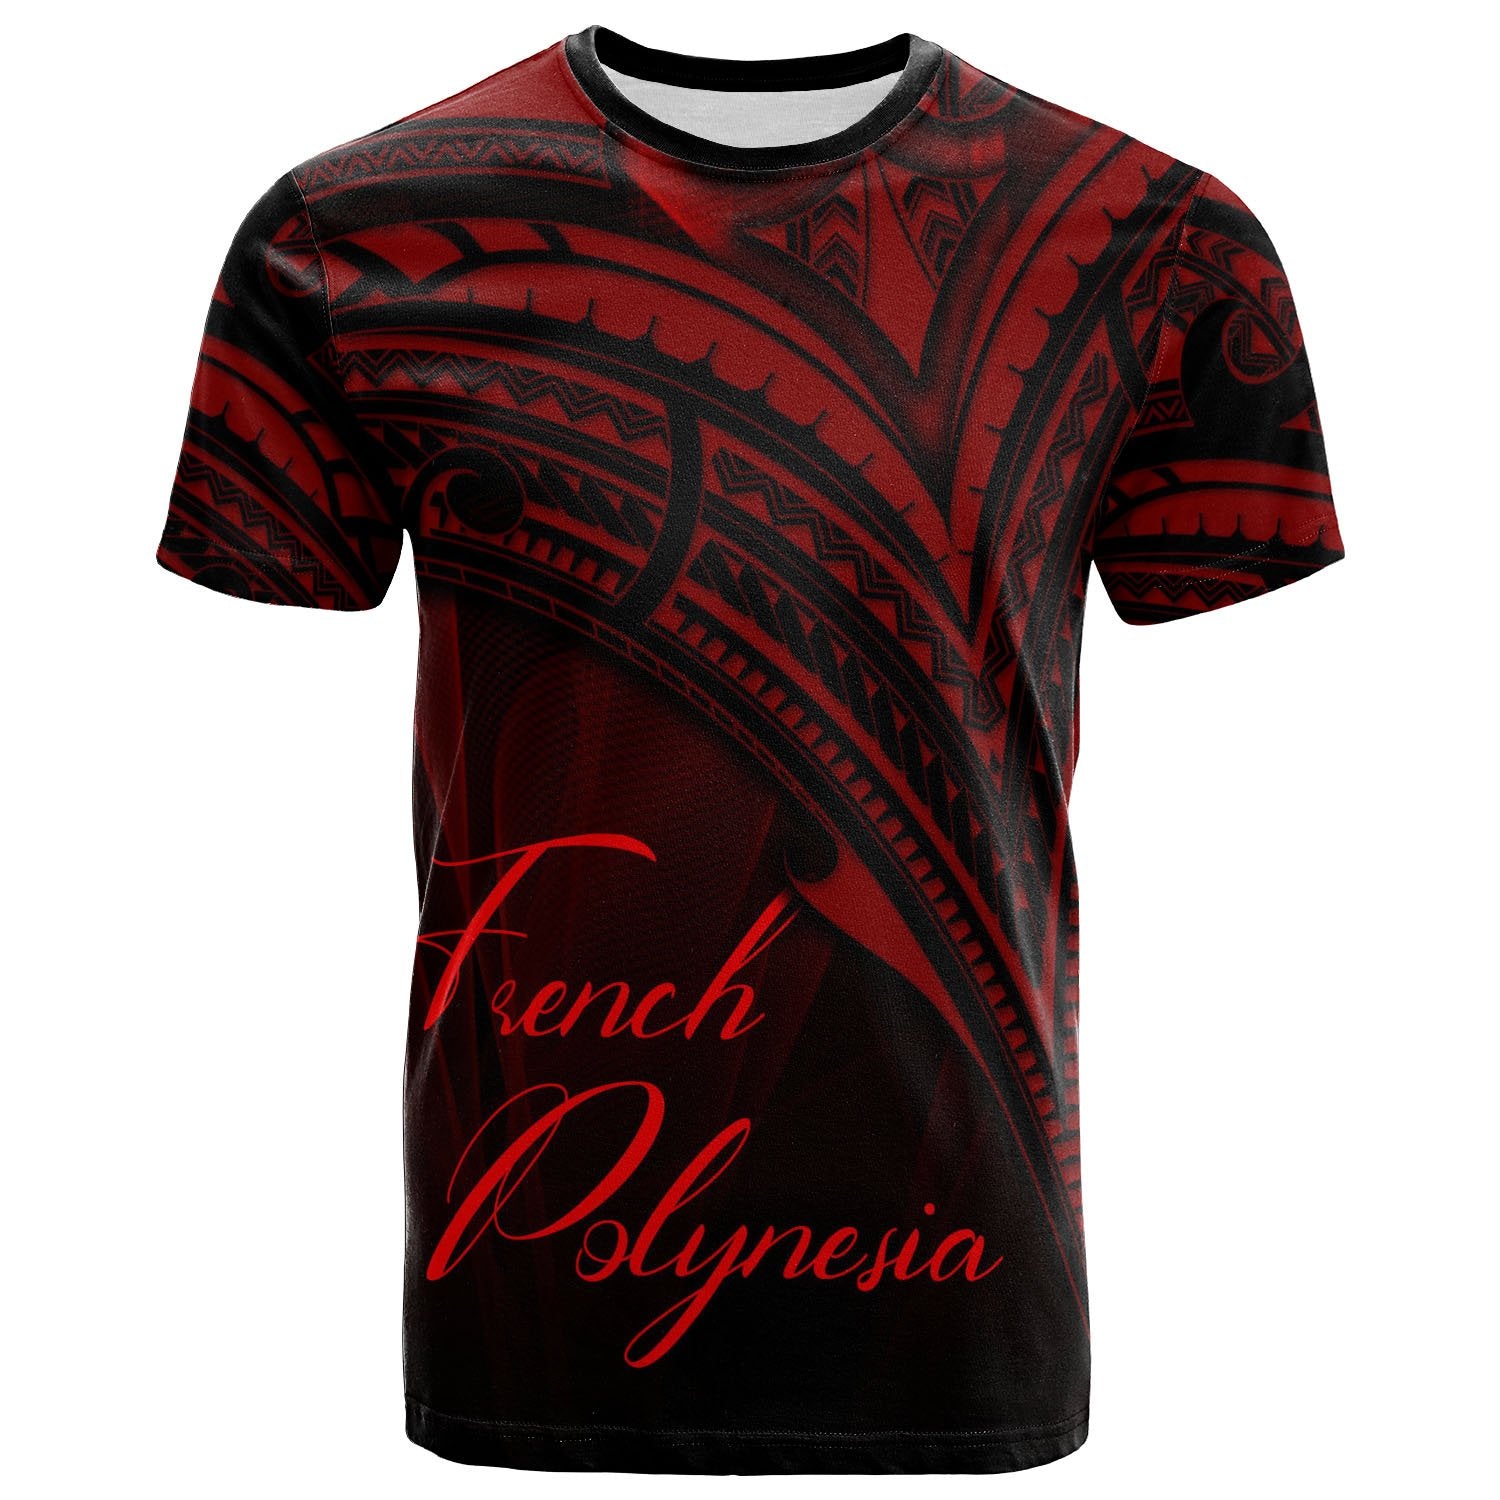 French Polynesia T Shirt Red Color Cross Style Unisex Black - Polynesian Pride